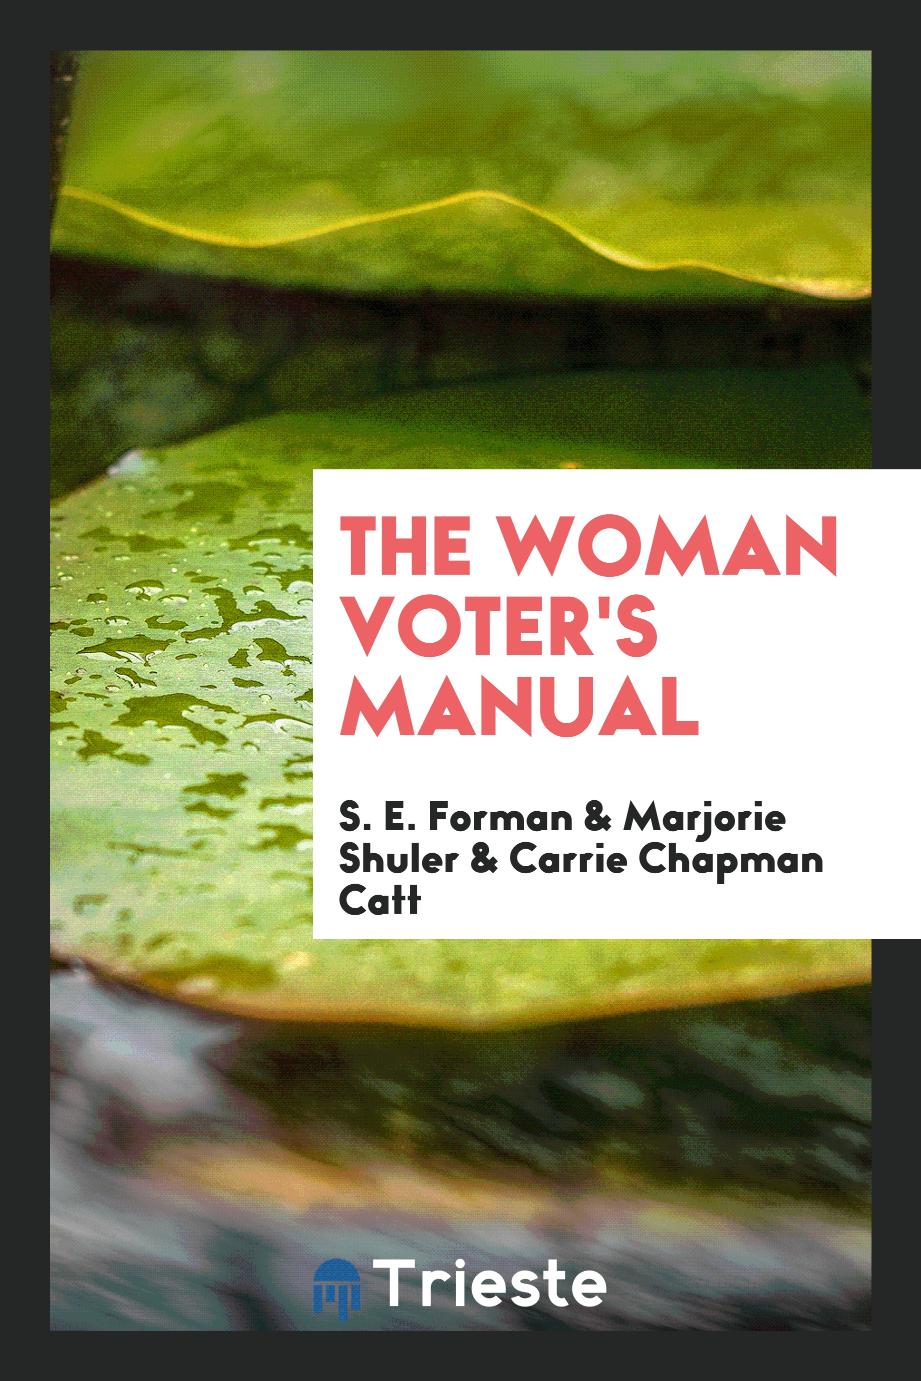 The woman voter's manual